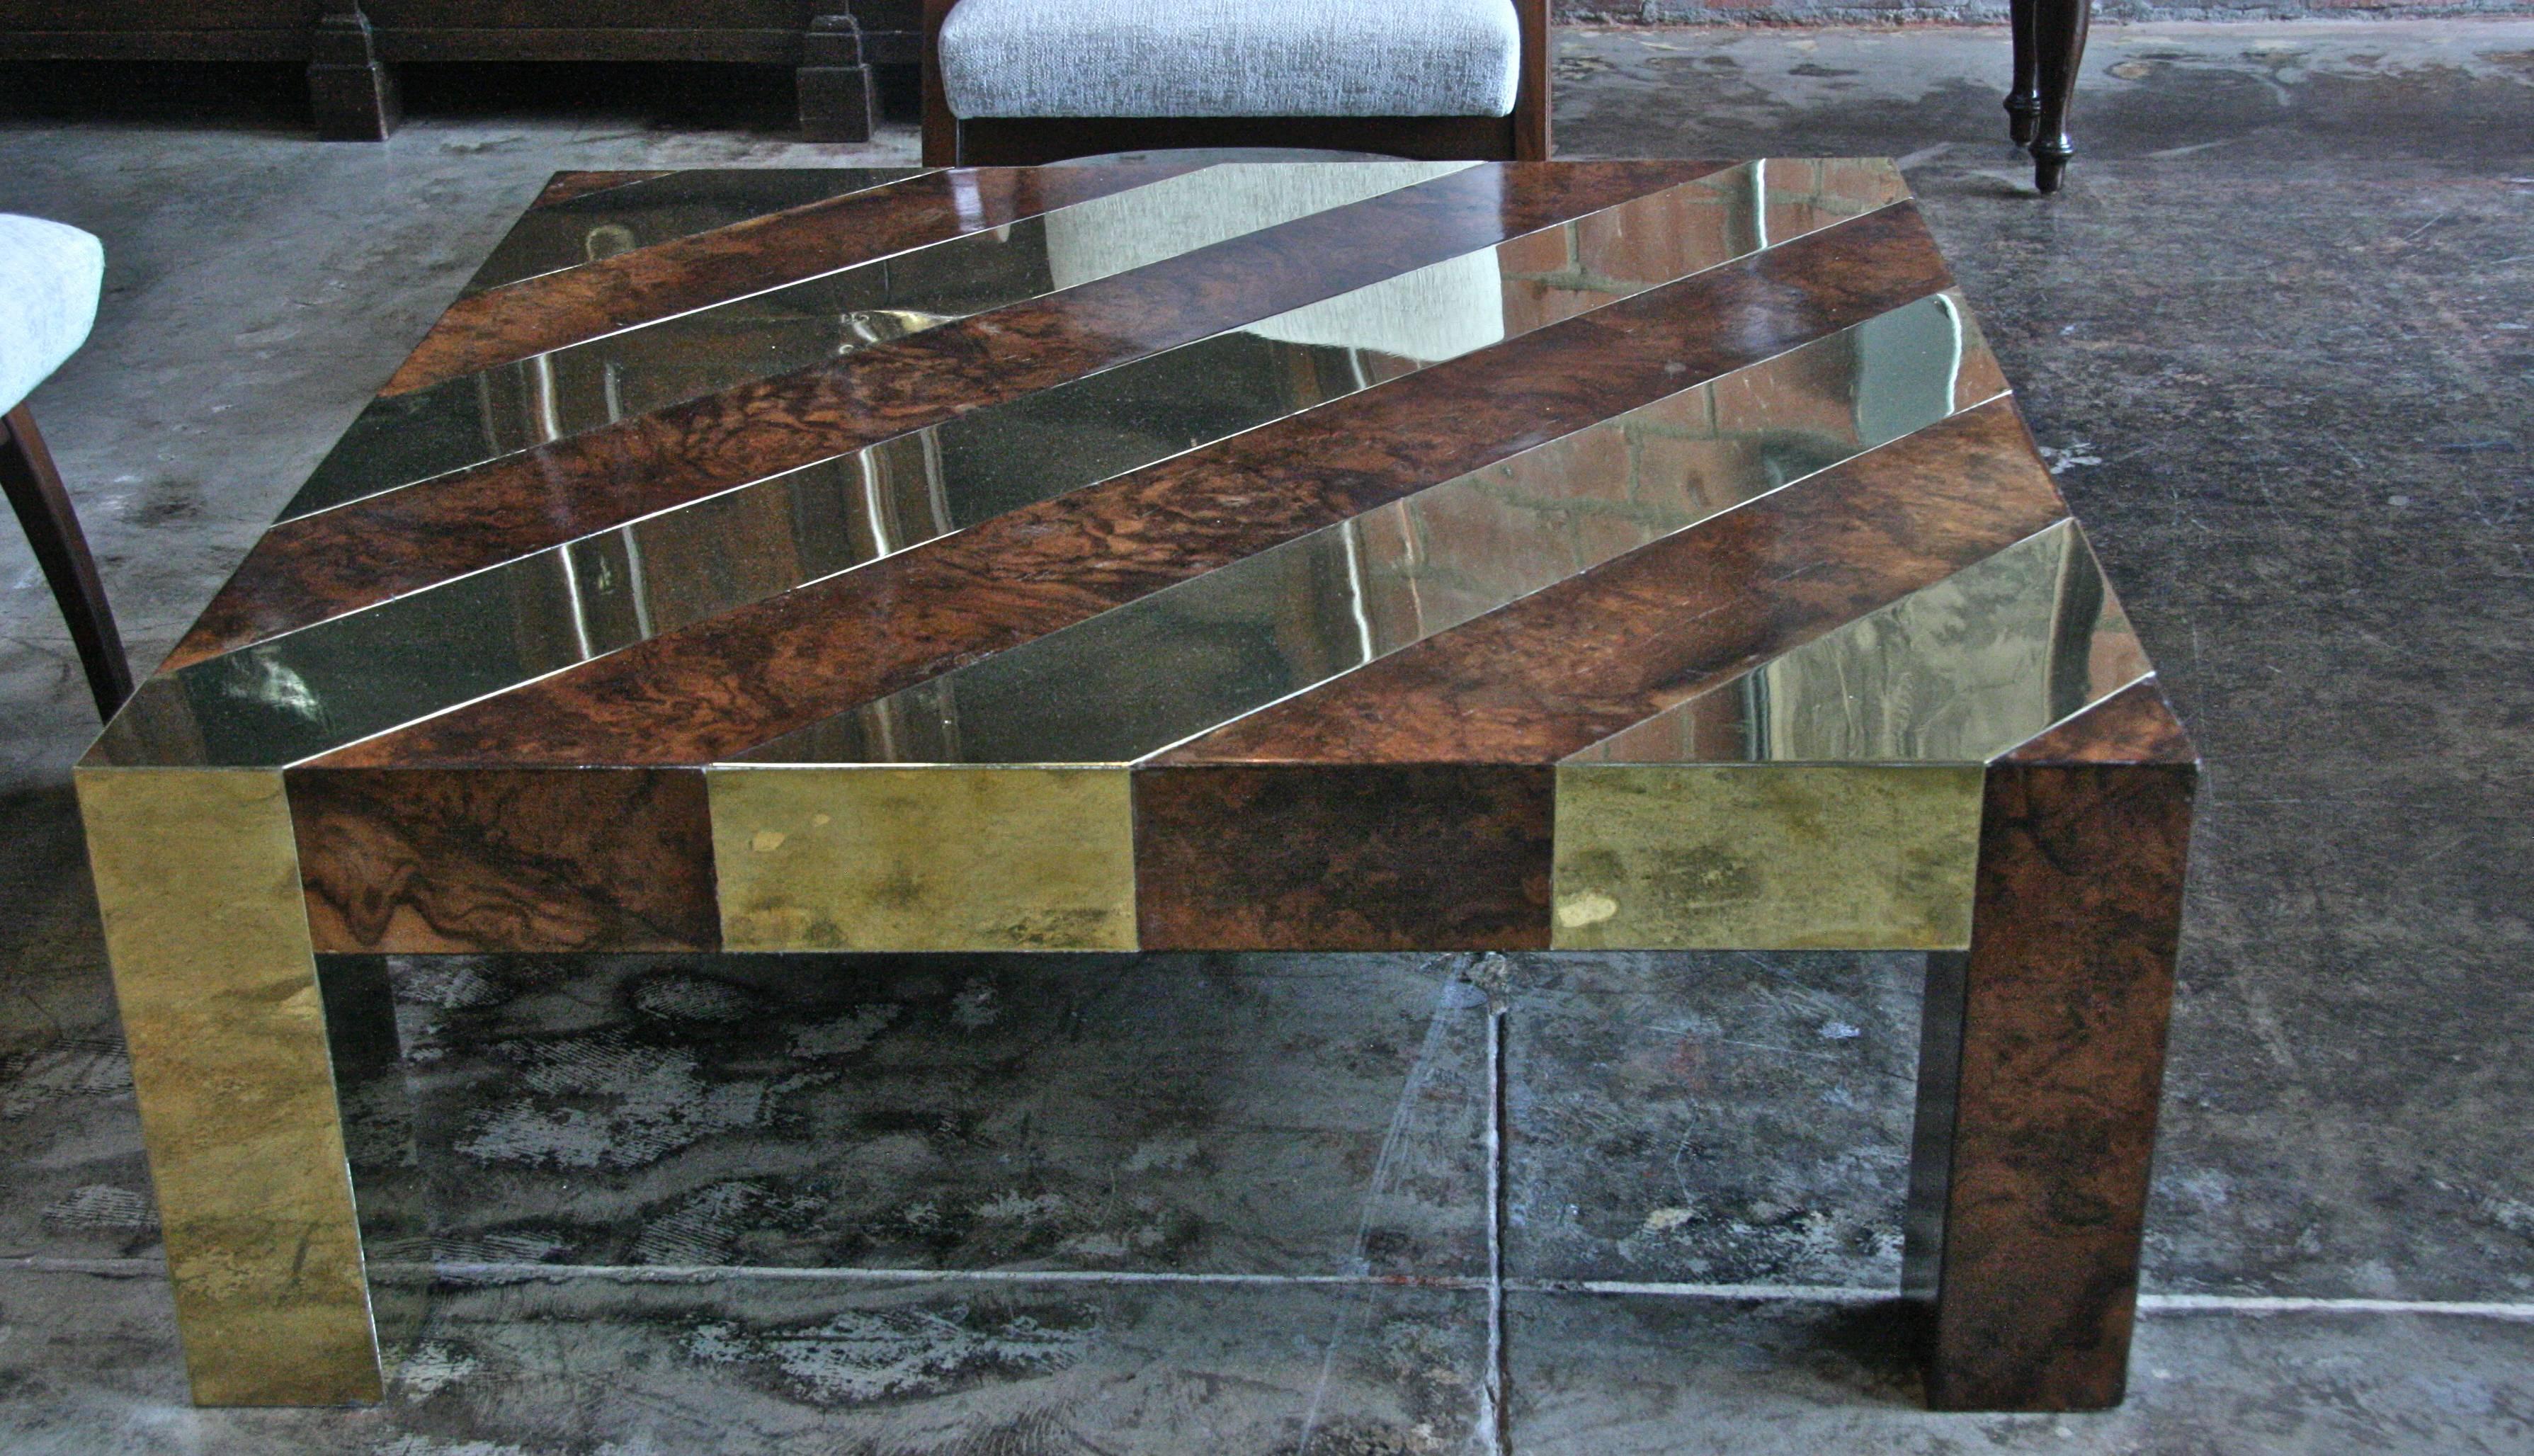 Walnut veneer and brass striped design bring this coffee table to la dolce Vita.